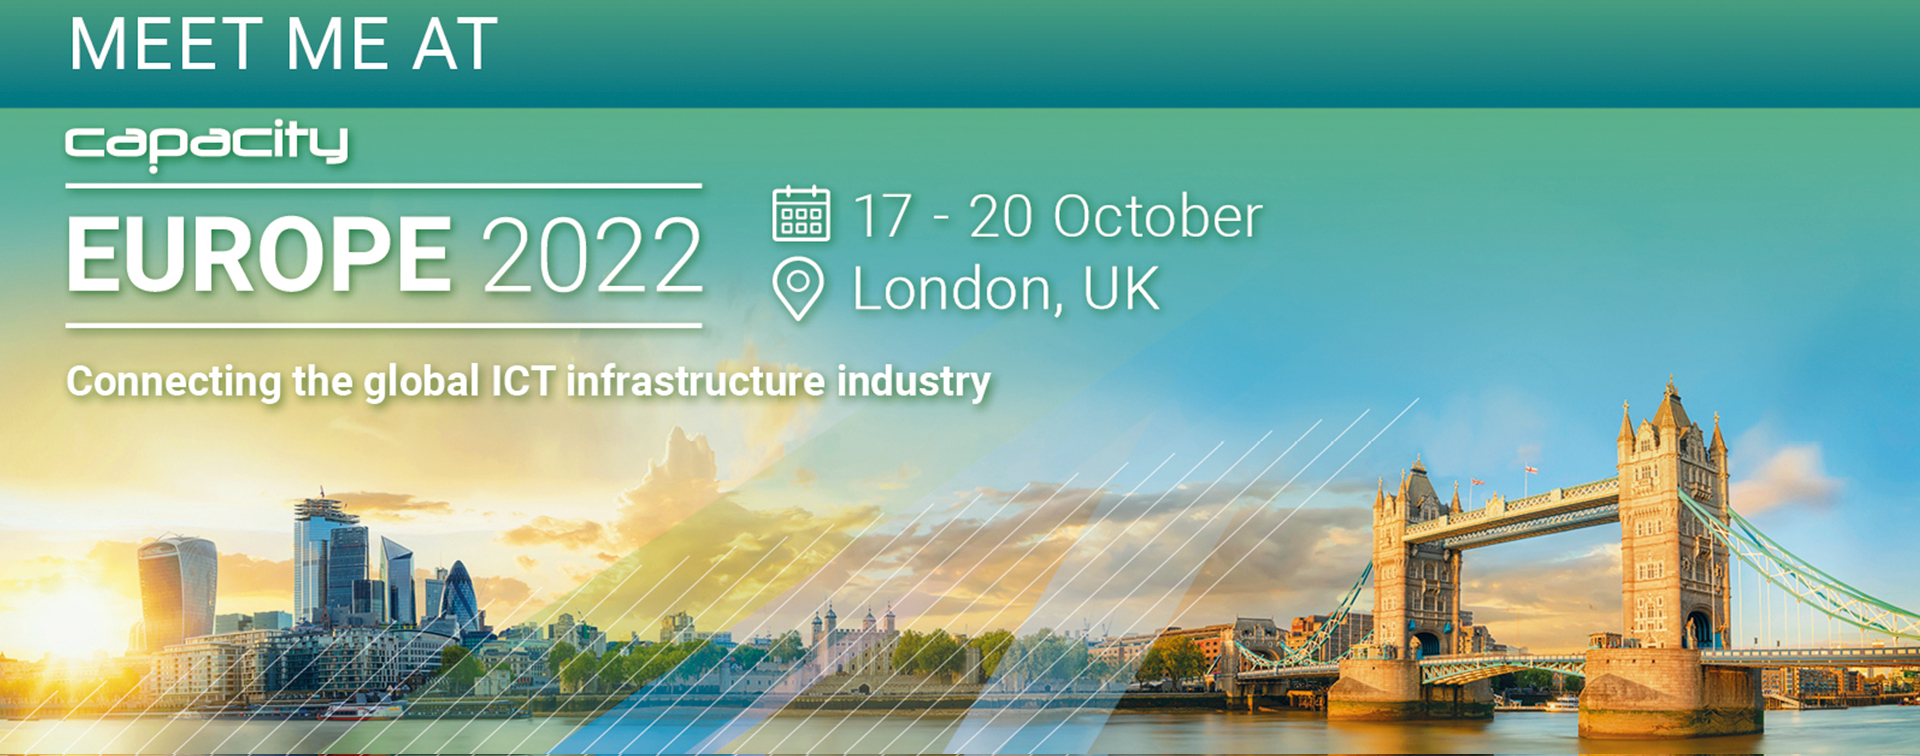 Fastweb is sponsor of the Capacity Europe 2022 edition. Visit us at the Fastweb Stand 712